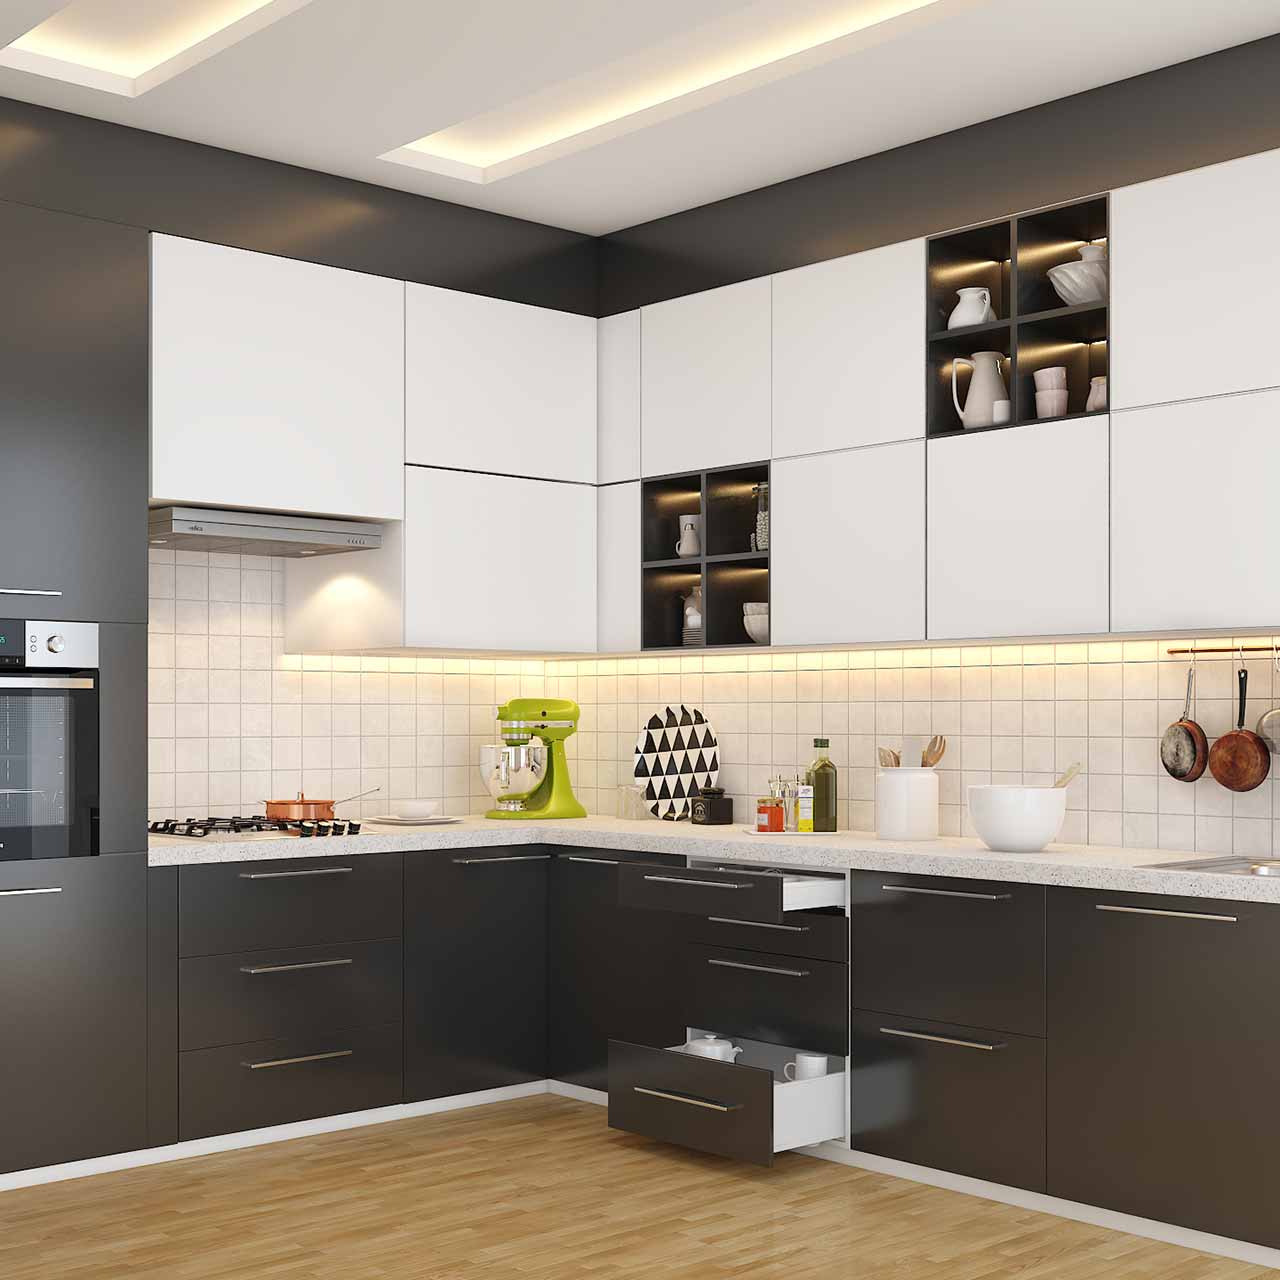 Different types of kitchen layouts using l shaped kitchen layout with grey and white cabinets and drawers makes beautiful kitchen designs